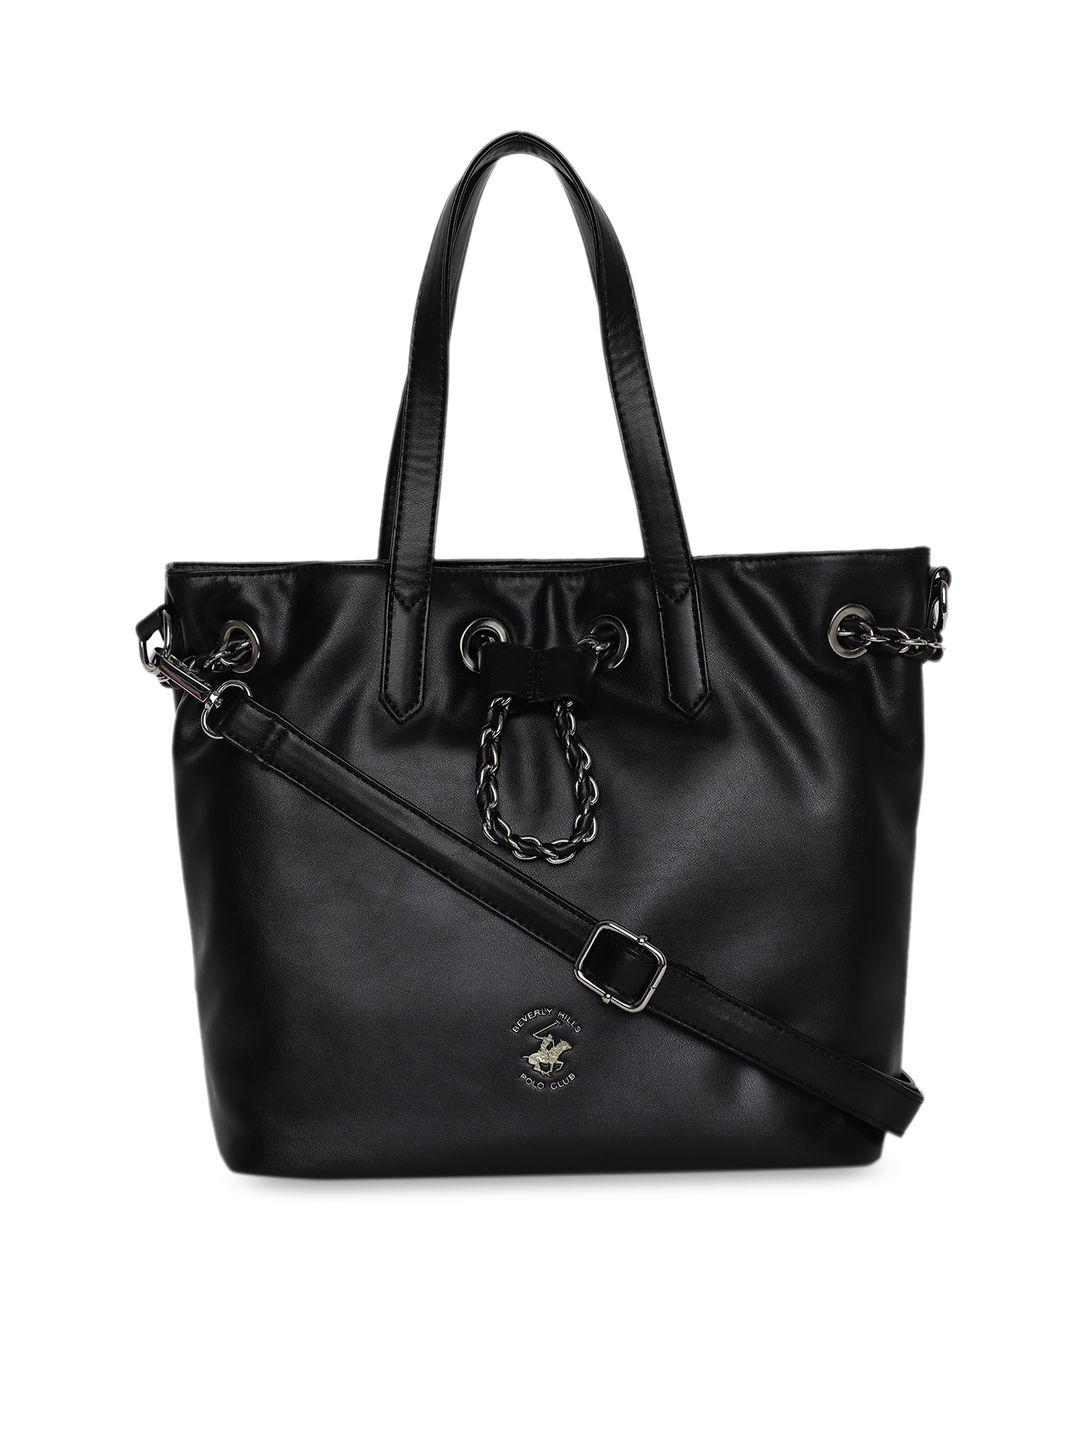 beverly hills polo club pu structured shoulder bag